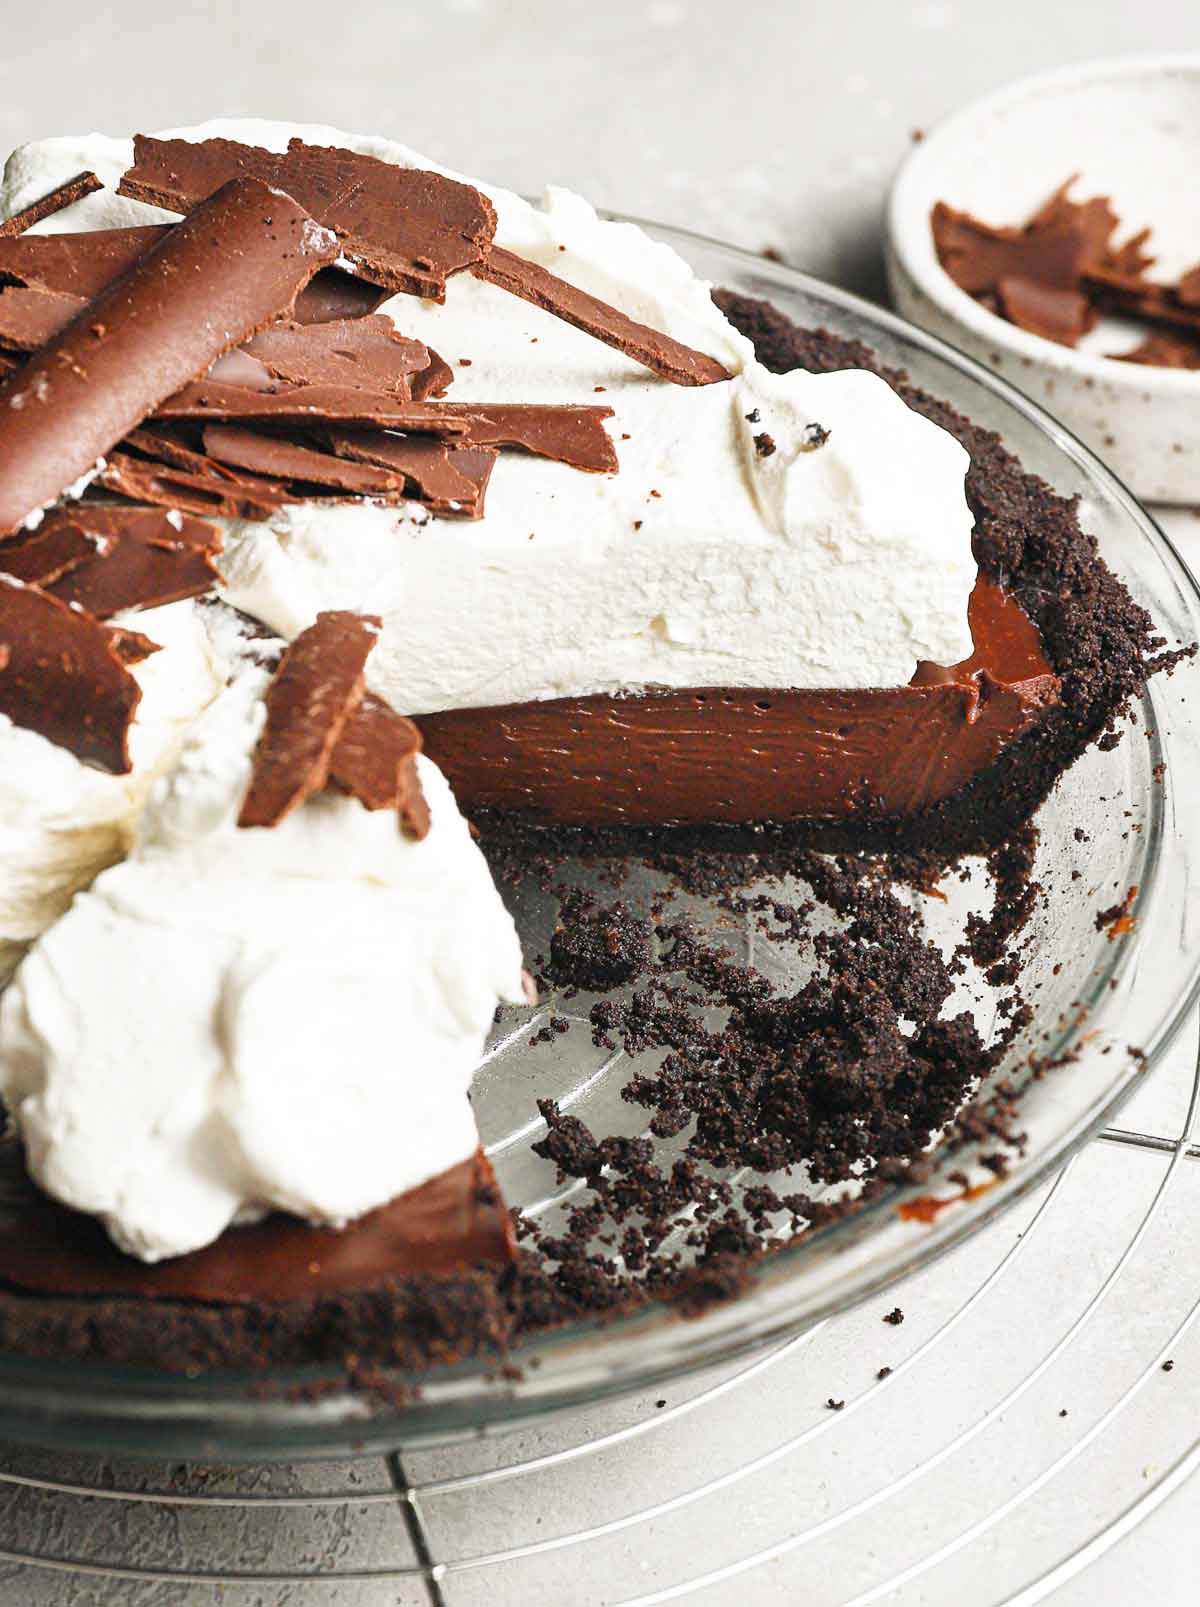 Chocolate cream pie in glass pie plate with a wedge of the pie missing.